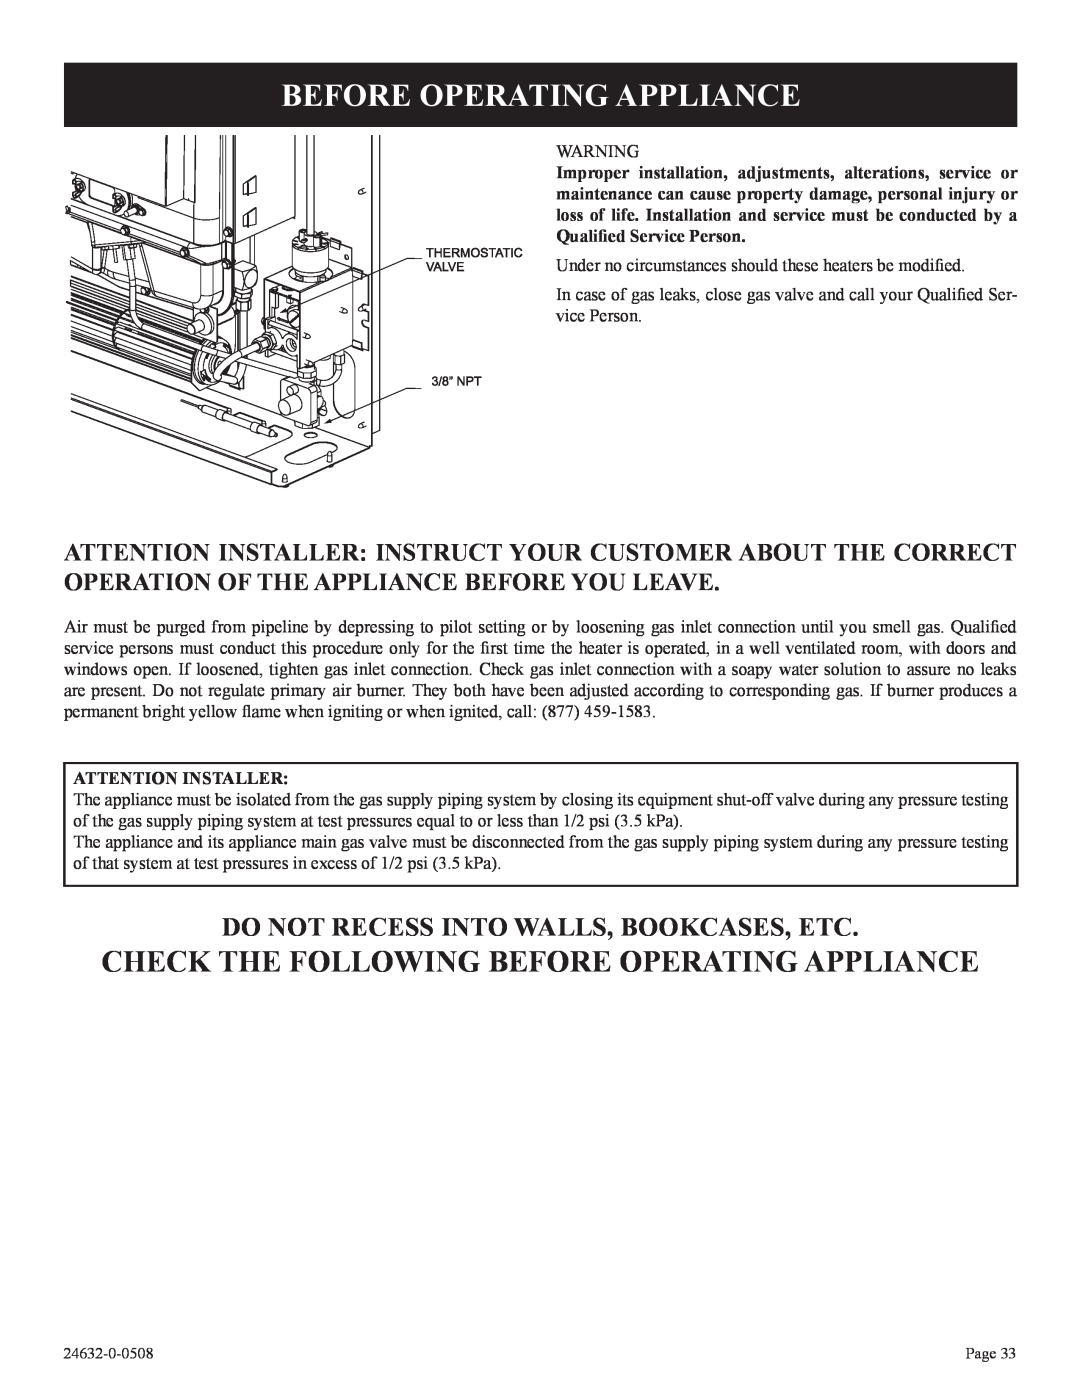 Epson P)-1, HWDV080DV(N installation instructions Check The Following Before Operating Appliance, Attention Installer 